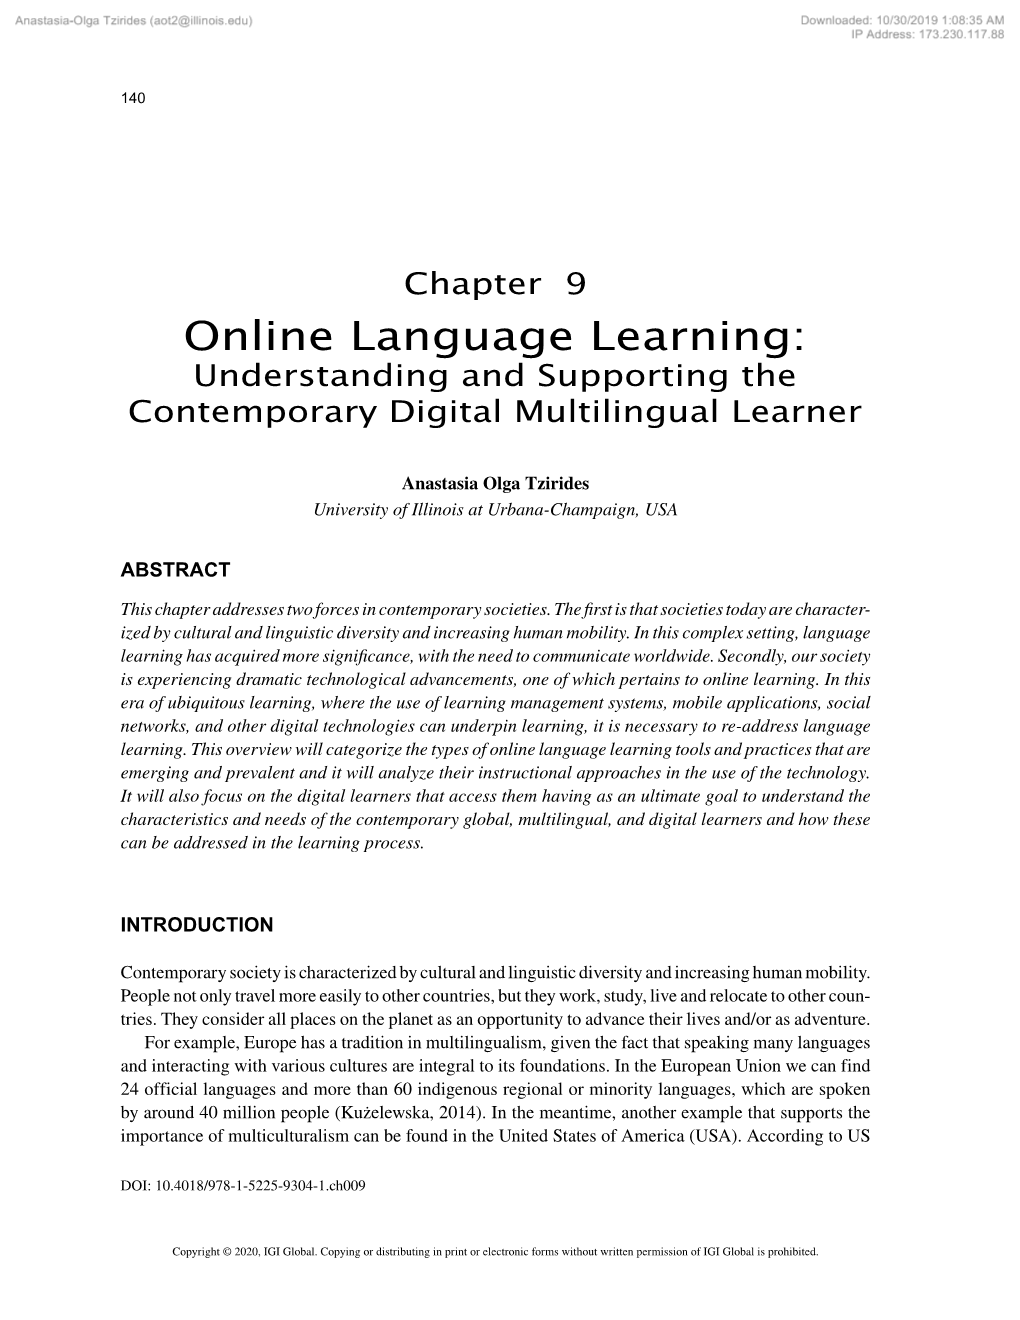 Online Language Learning: Understanding and Supporting the Contemporary Digital Multilingual Learner